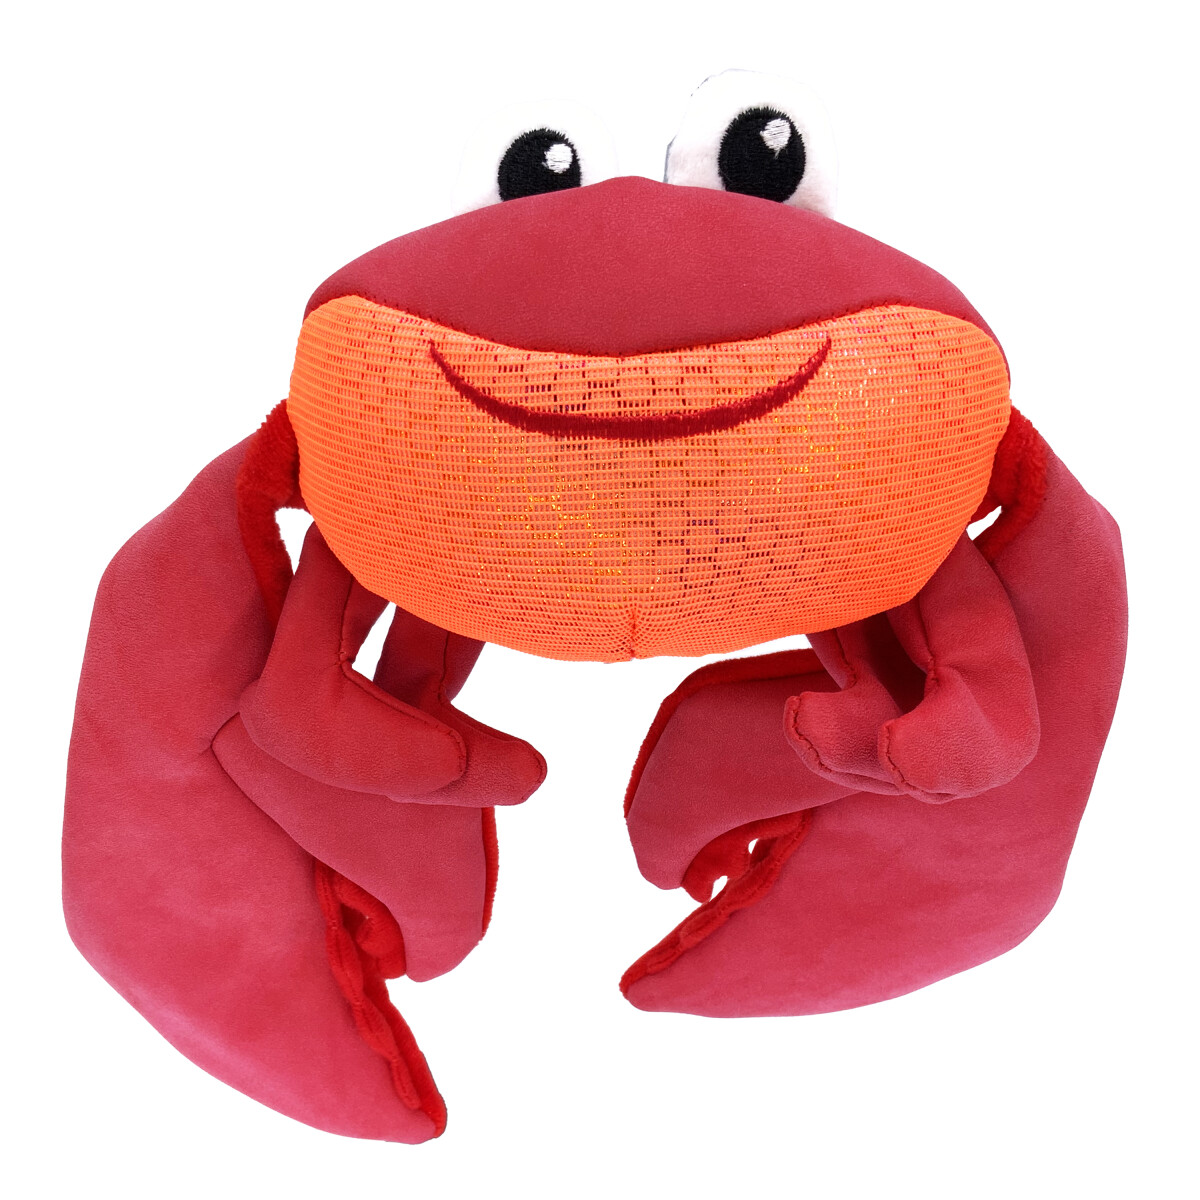 Kg1992 - Peluche pour chiens crabe Shimmy Shakers - Kong